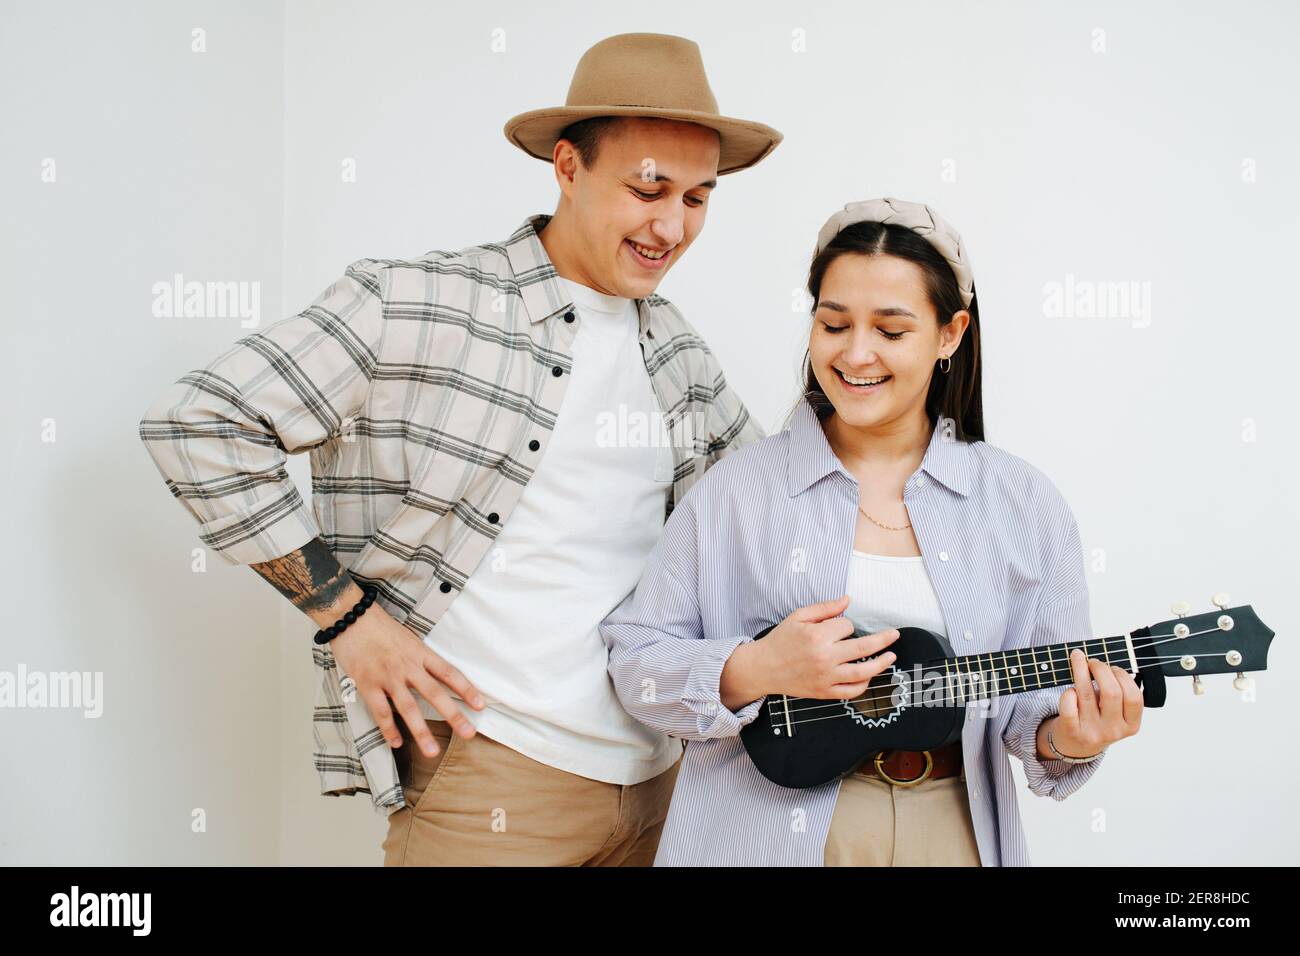 Funny guys sing and play the ukulele together on a gray background Stock Photo